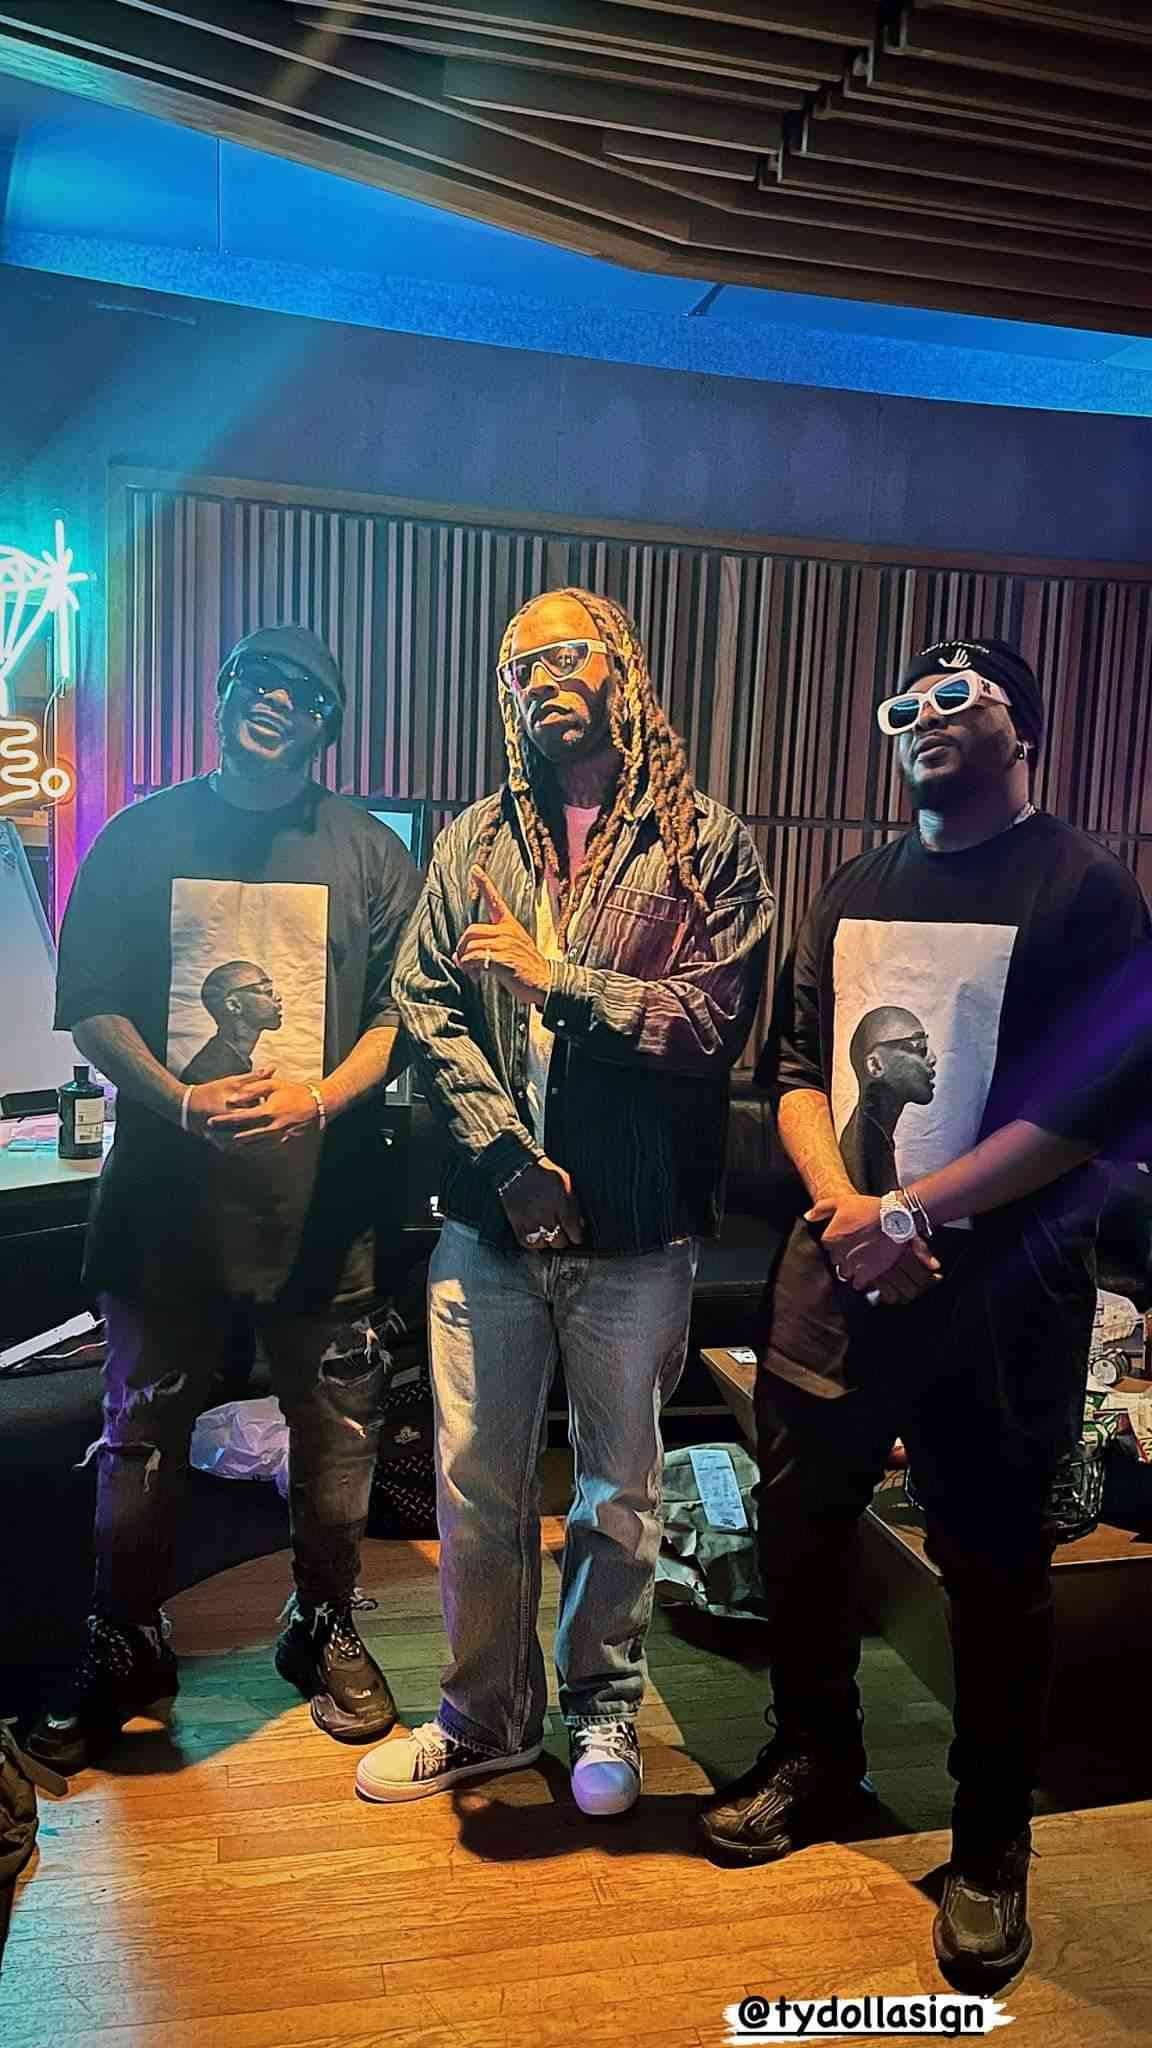 Major League Djz Hangs out With Ty Dolla Sign